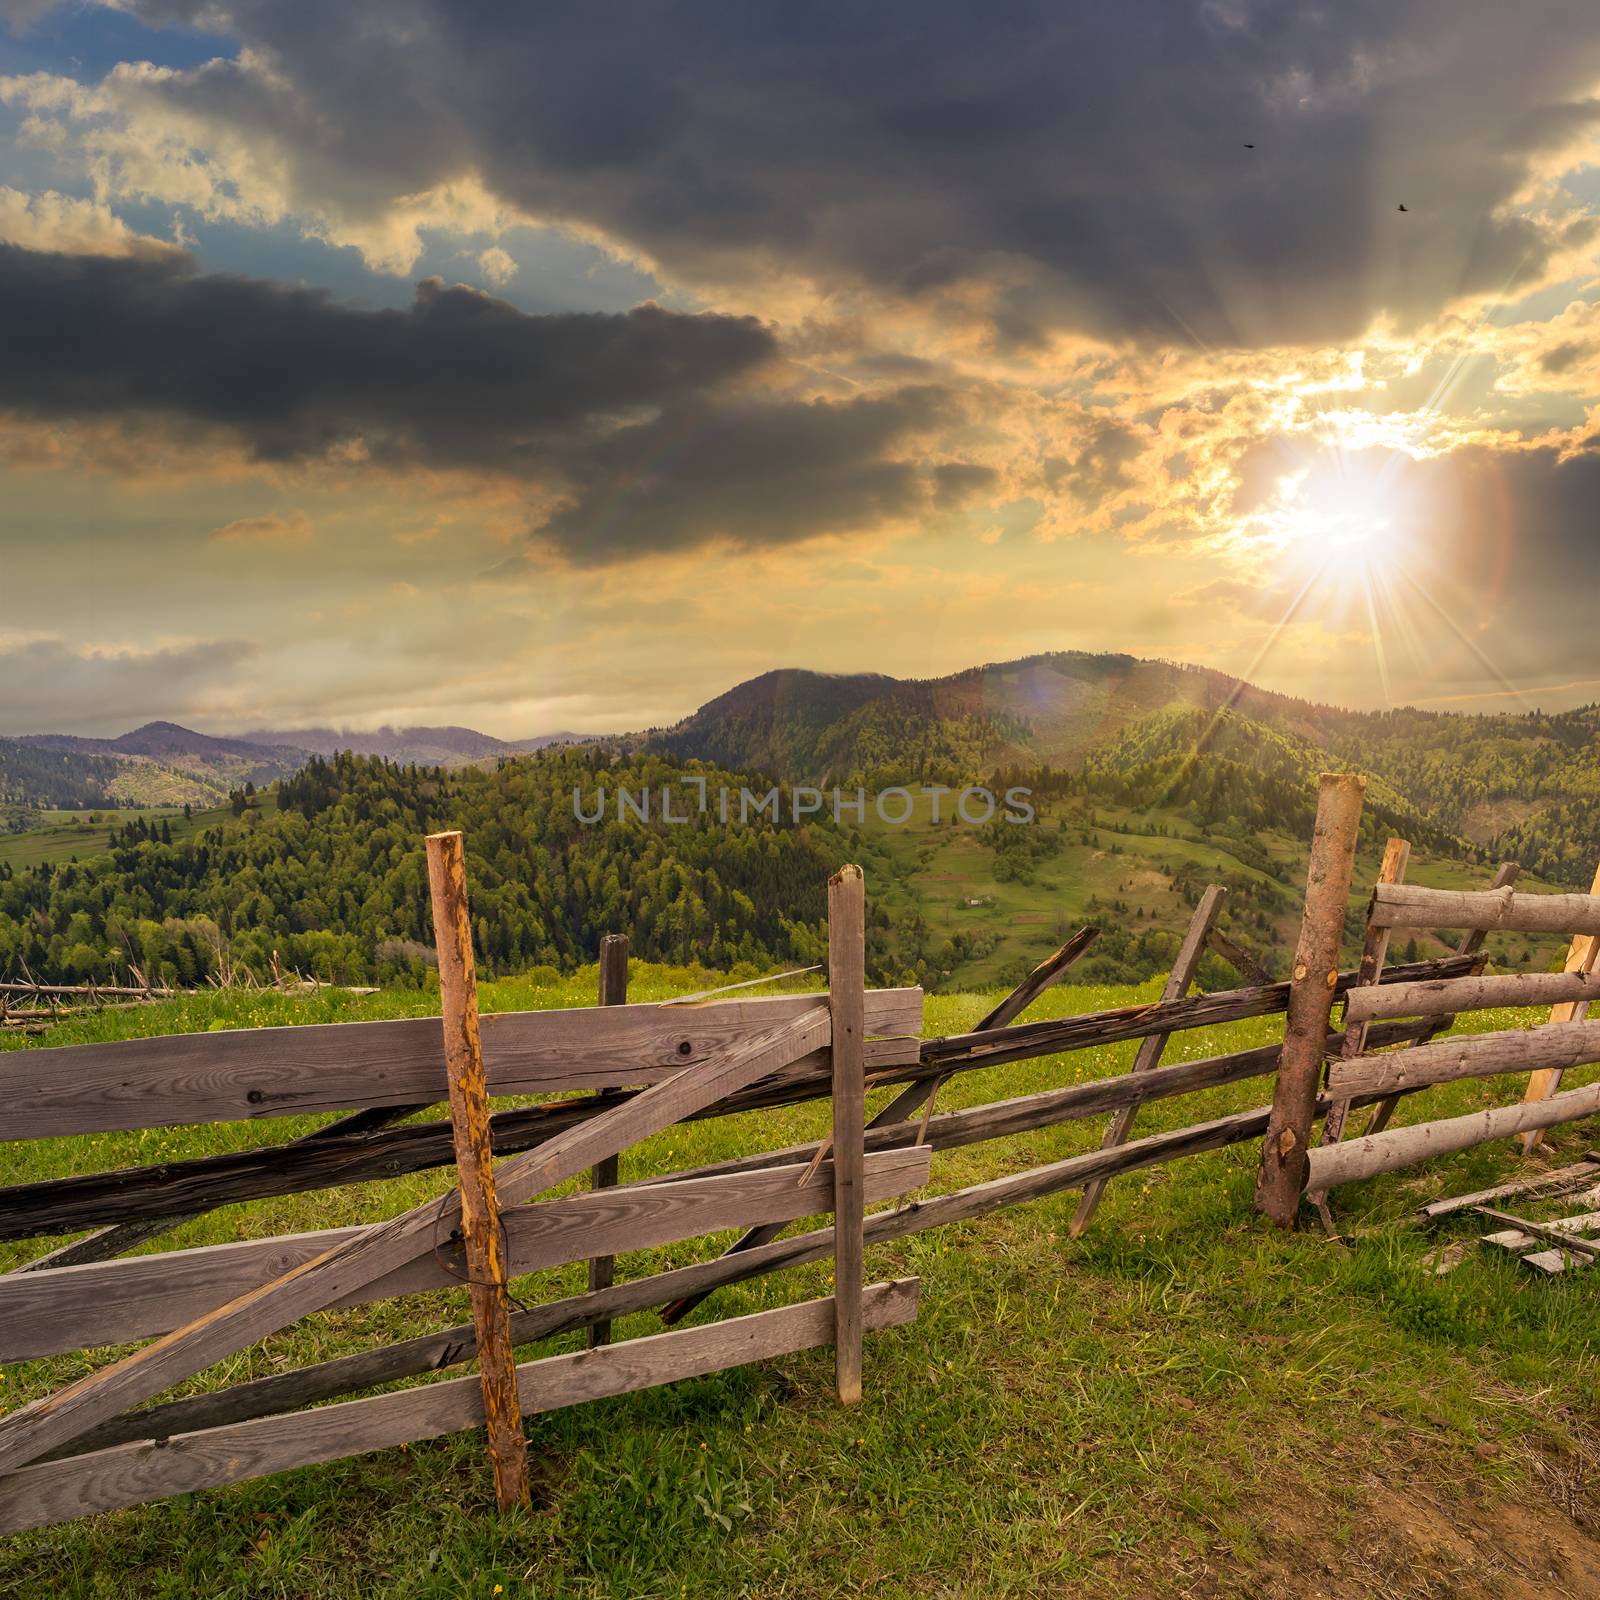 fence on hillside meadow in mountain at sunset by Pellinni